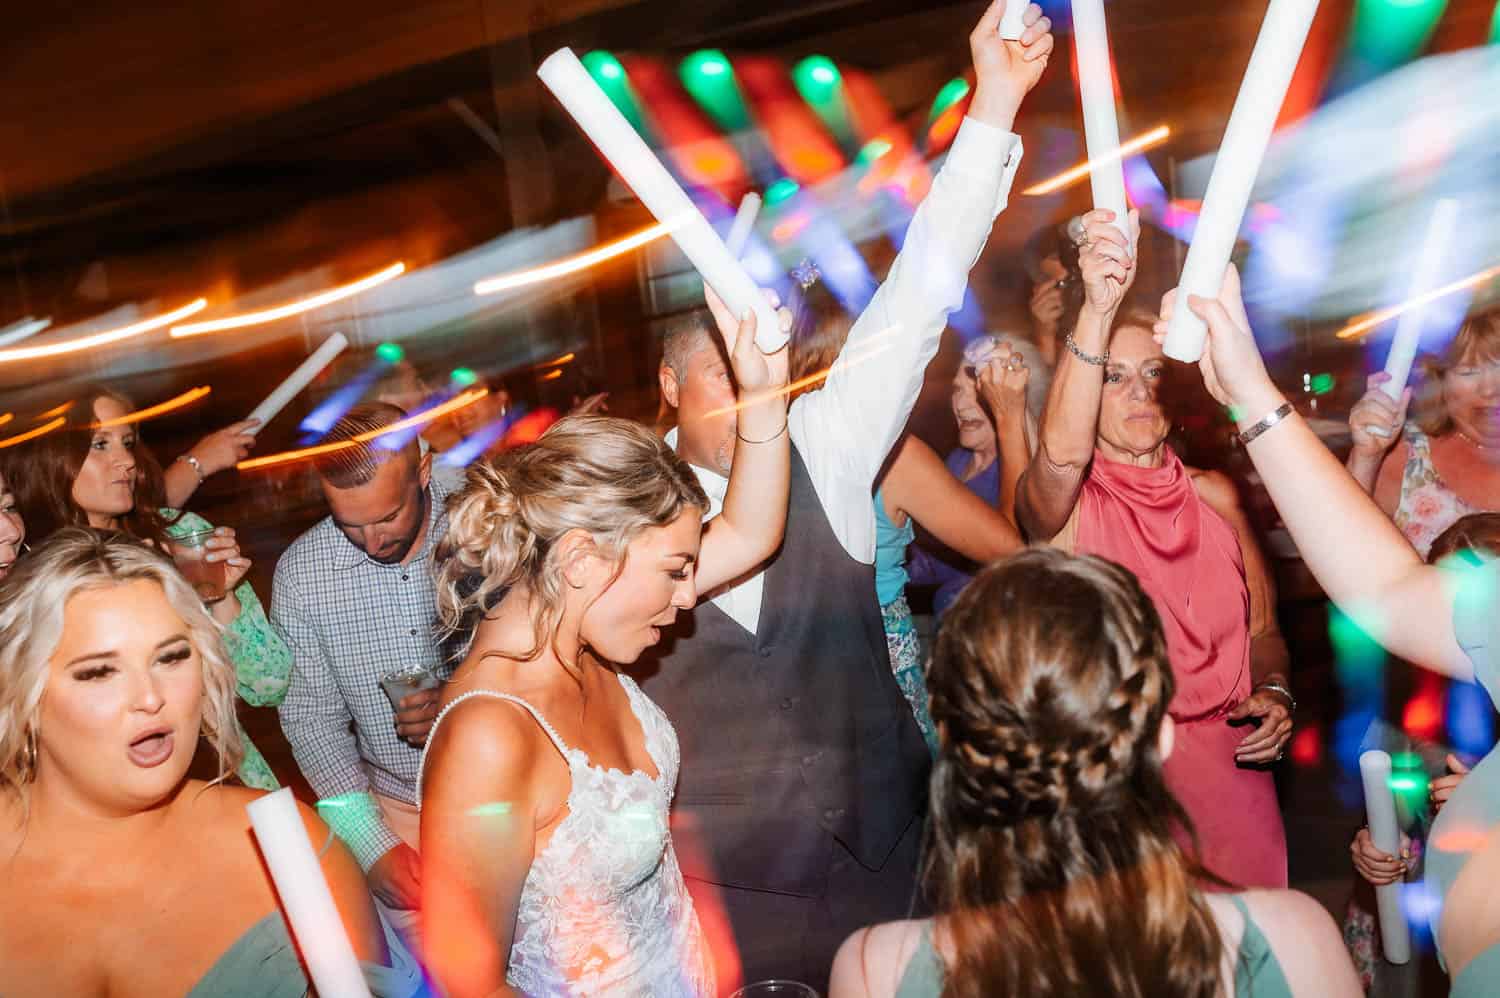 A bride and groom dancing at their reception with guests.